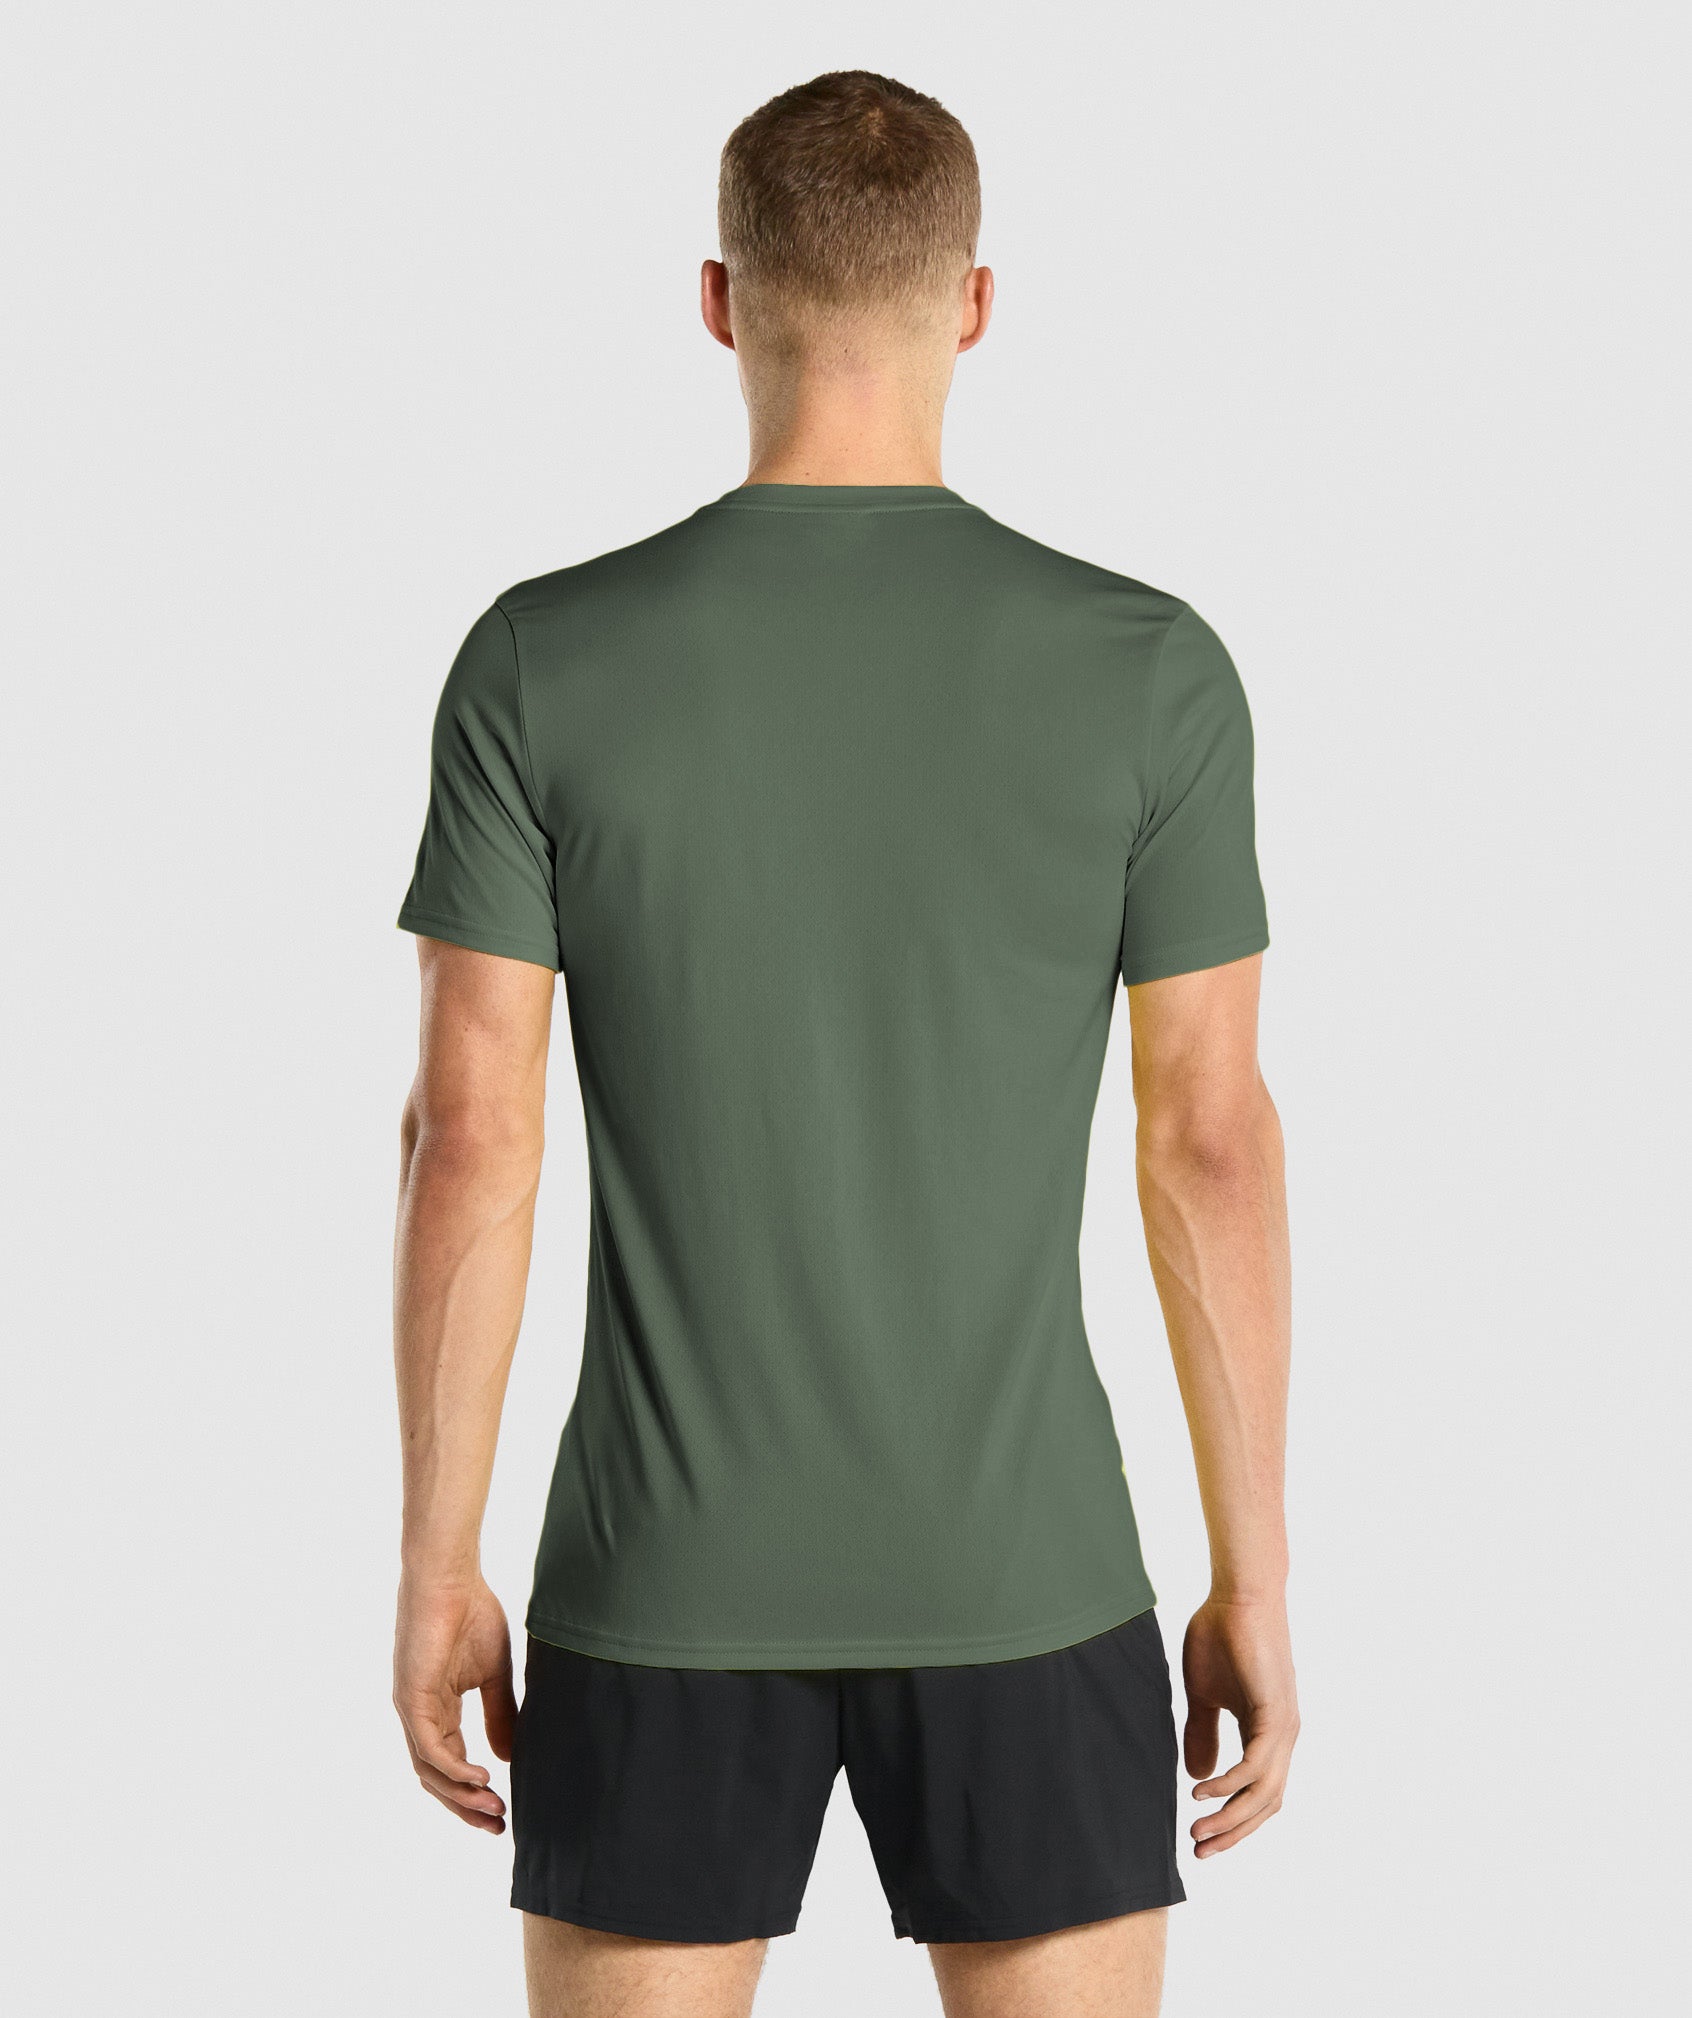 Arrival T-Shirt in Green - view 2